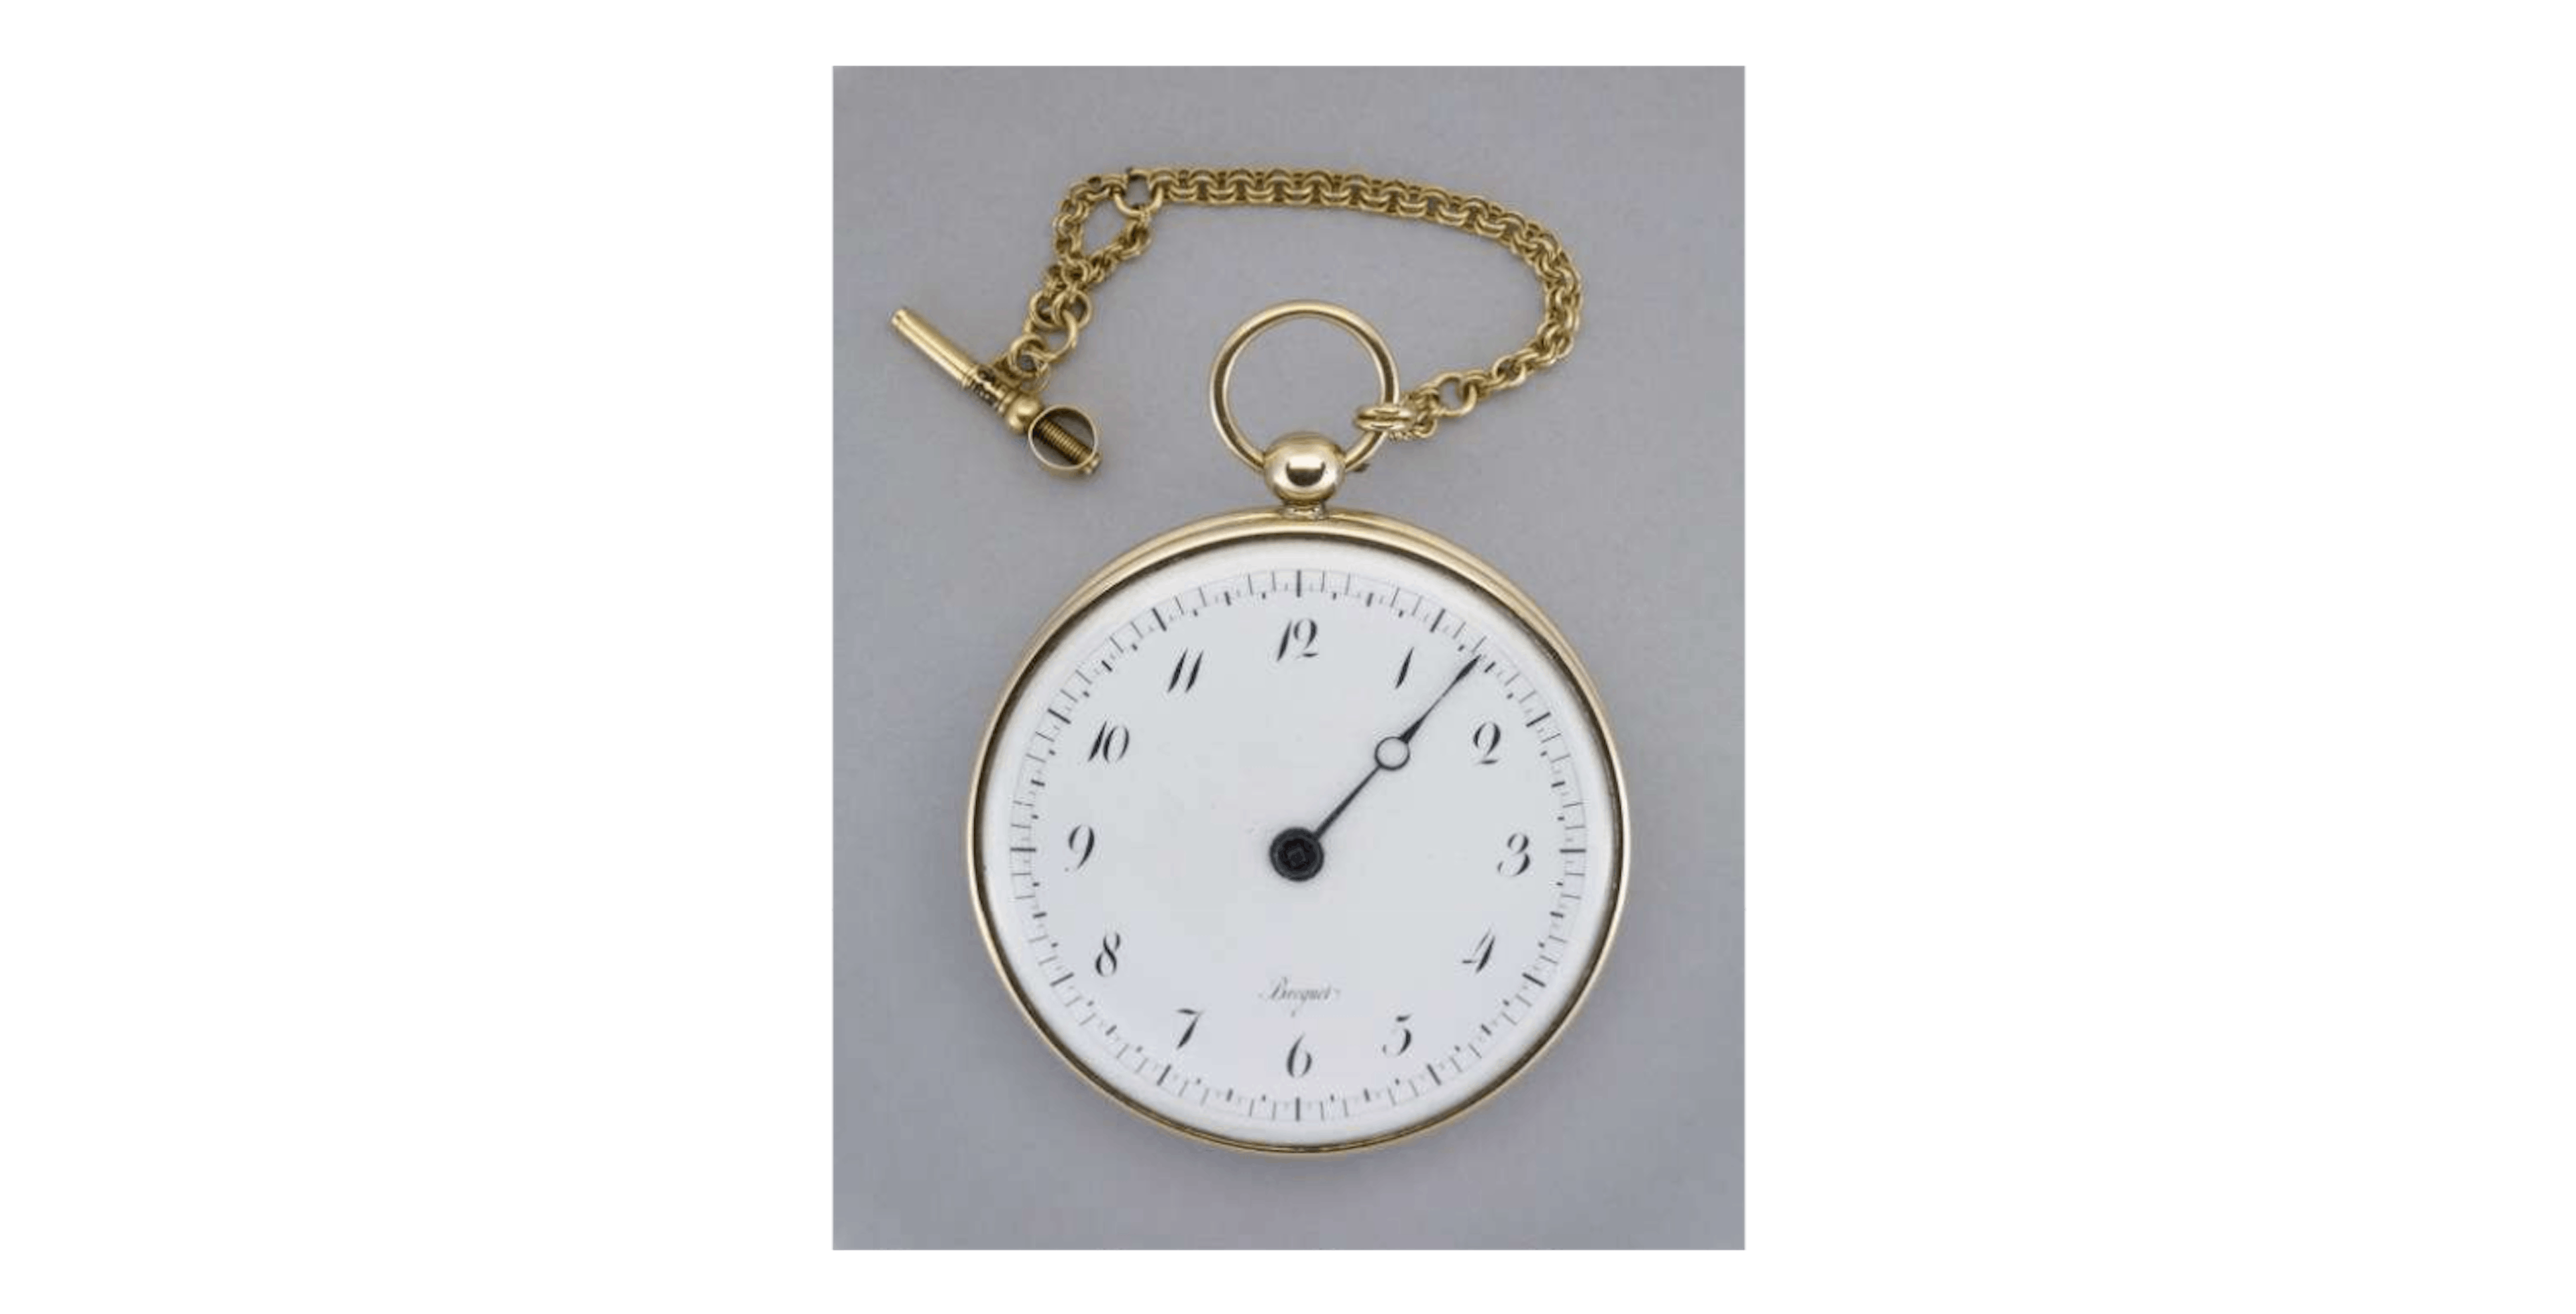 Breguet Souscription Pocket Watch Image from: britishmuseum.org